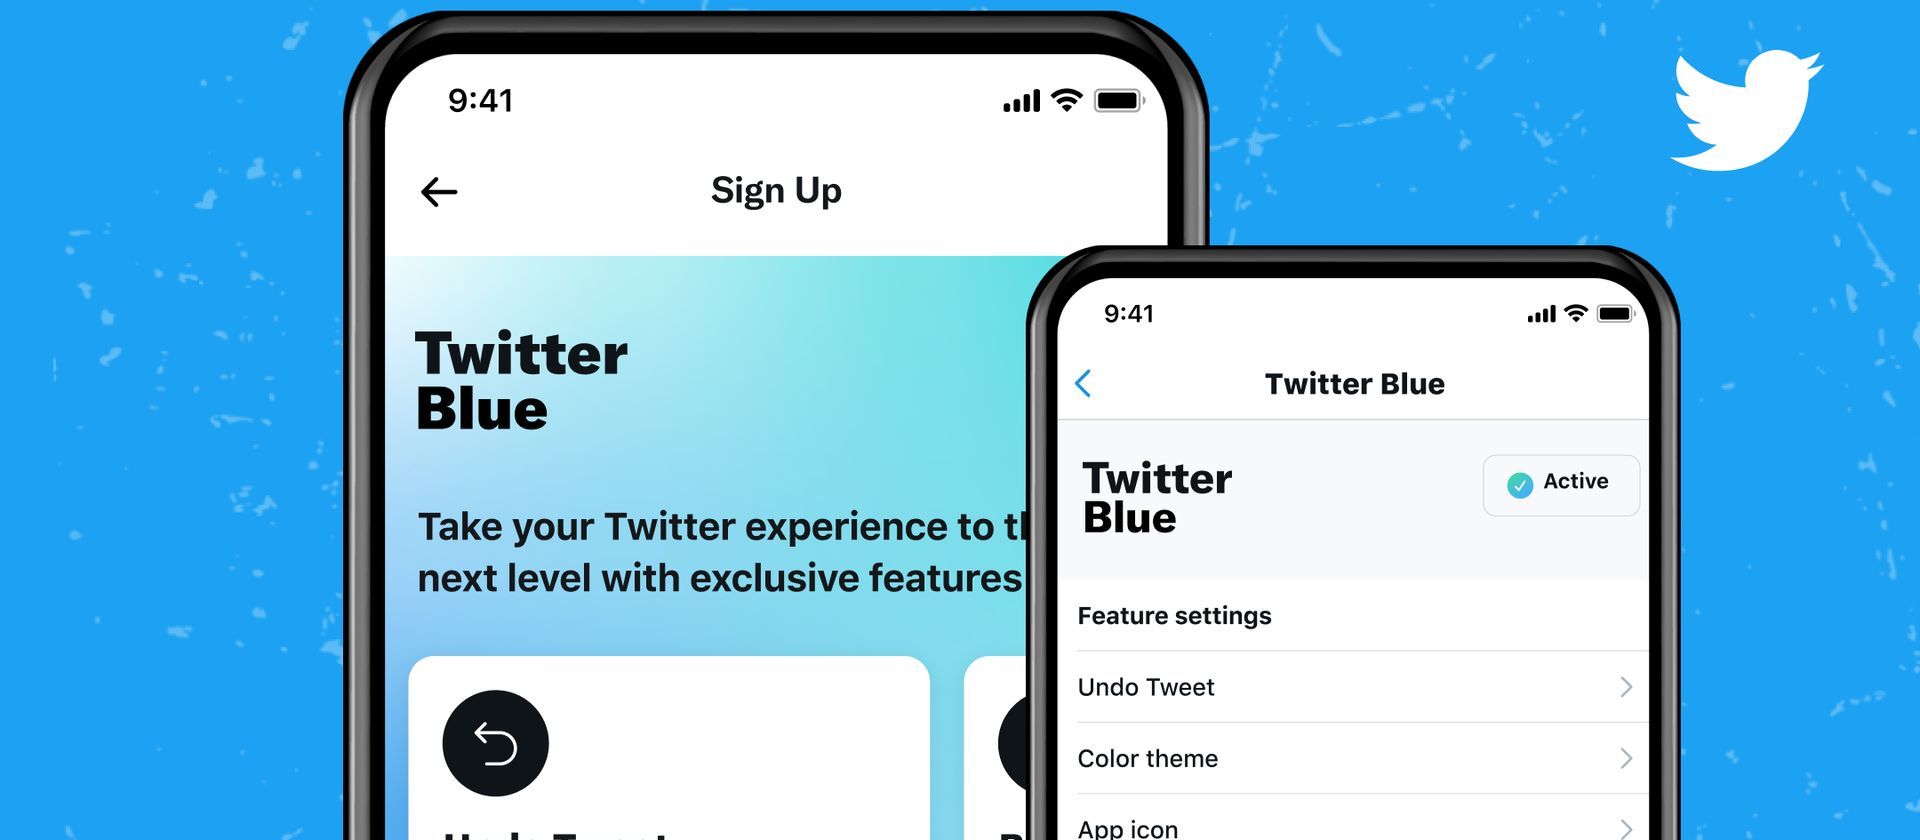 In this article, we are going to be covering how to get Twitter Blue outside US, if Twitter Blue not available in your country and you want to use the new feature.